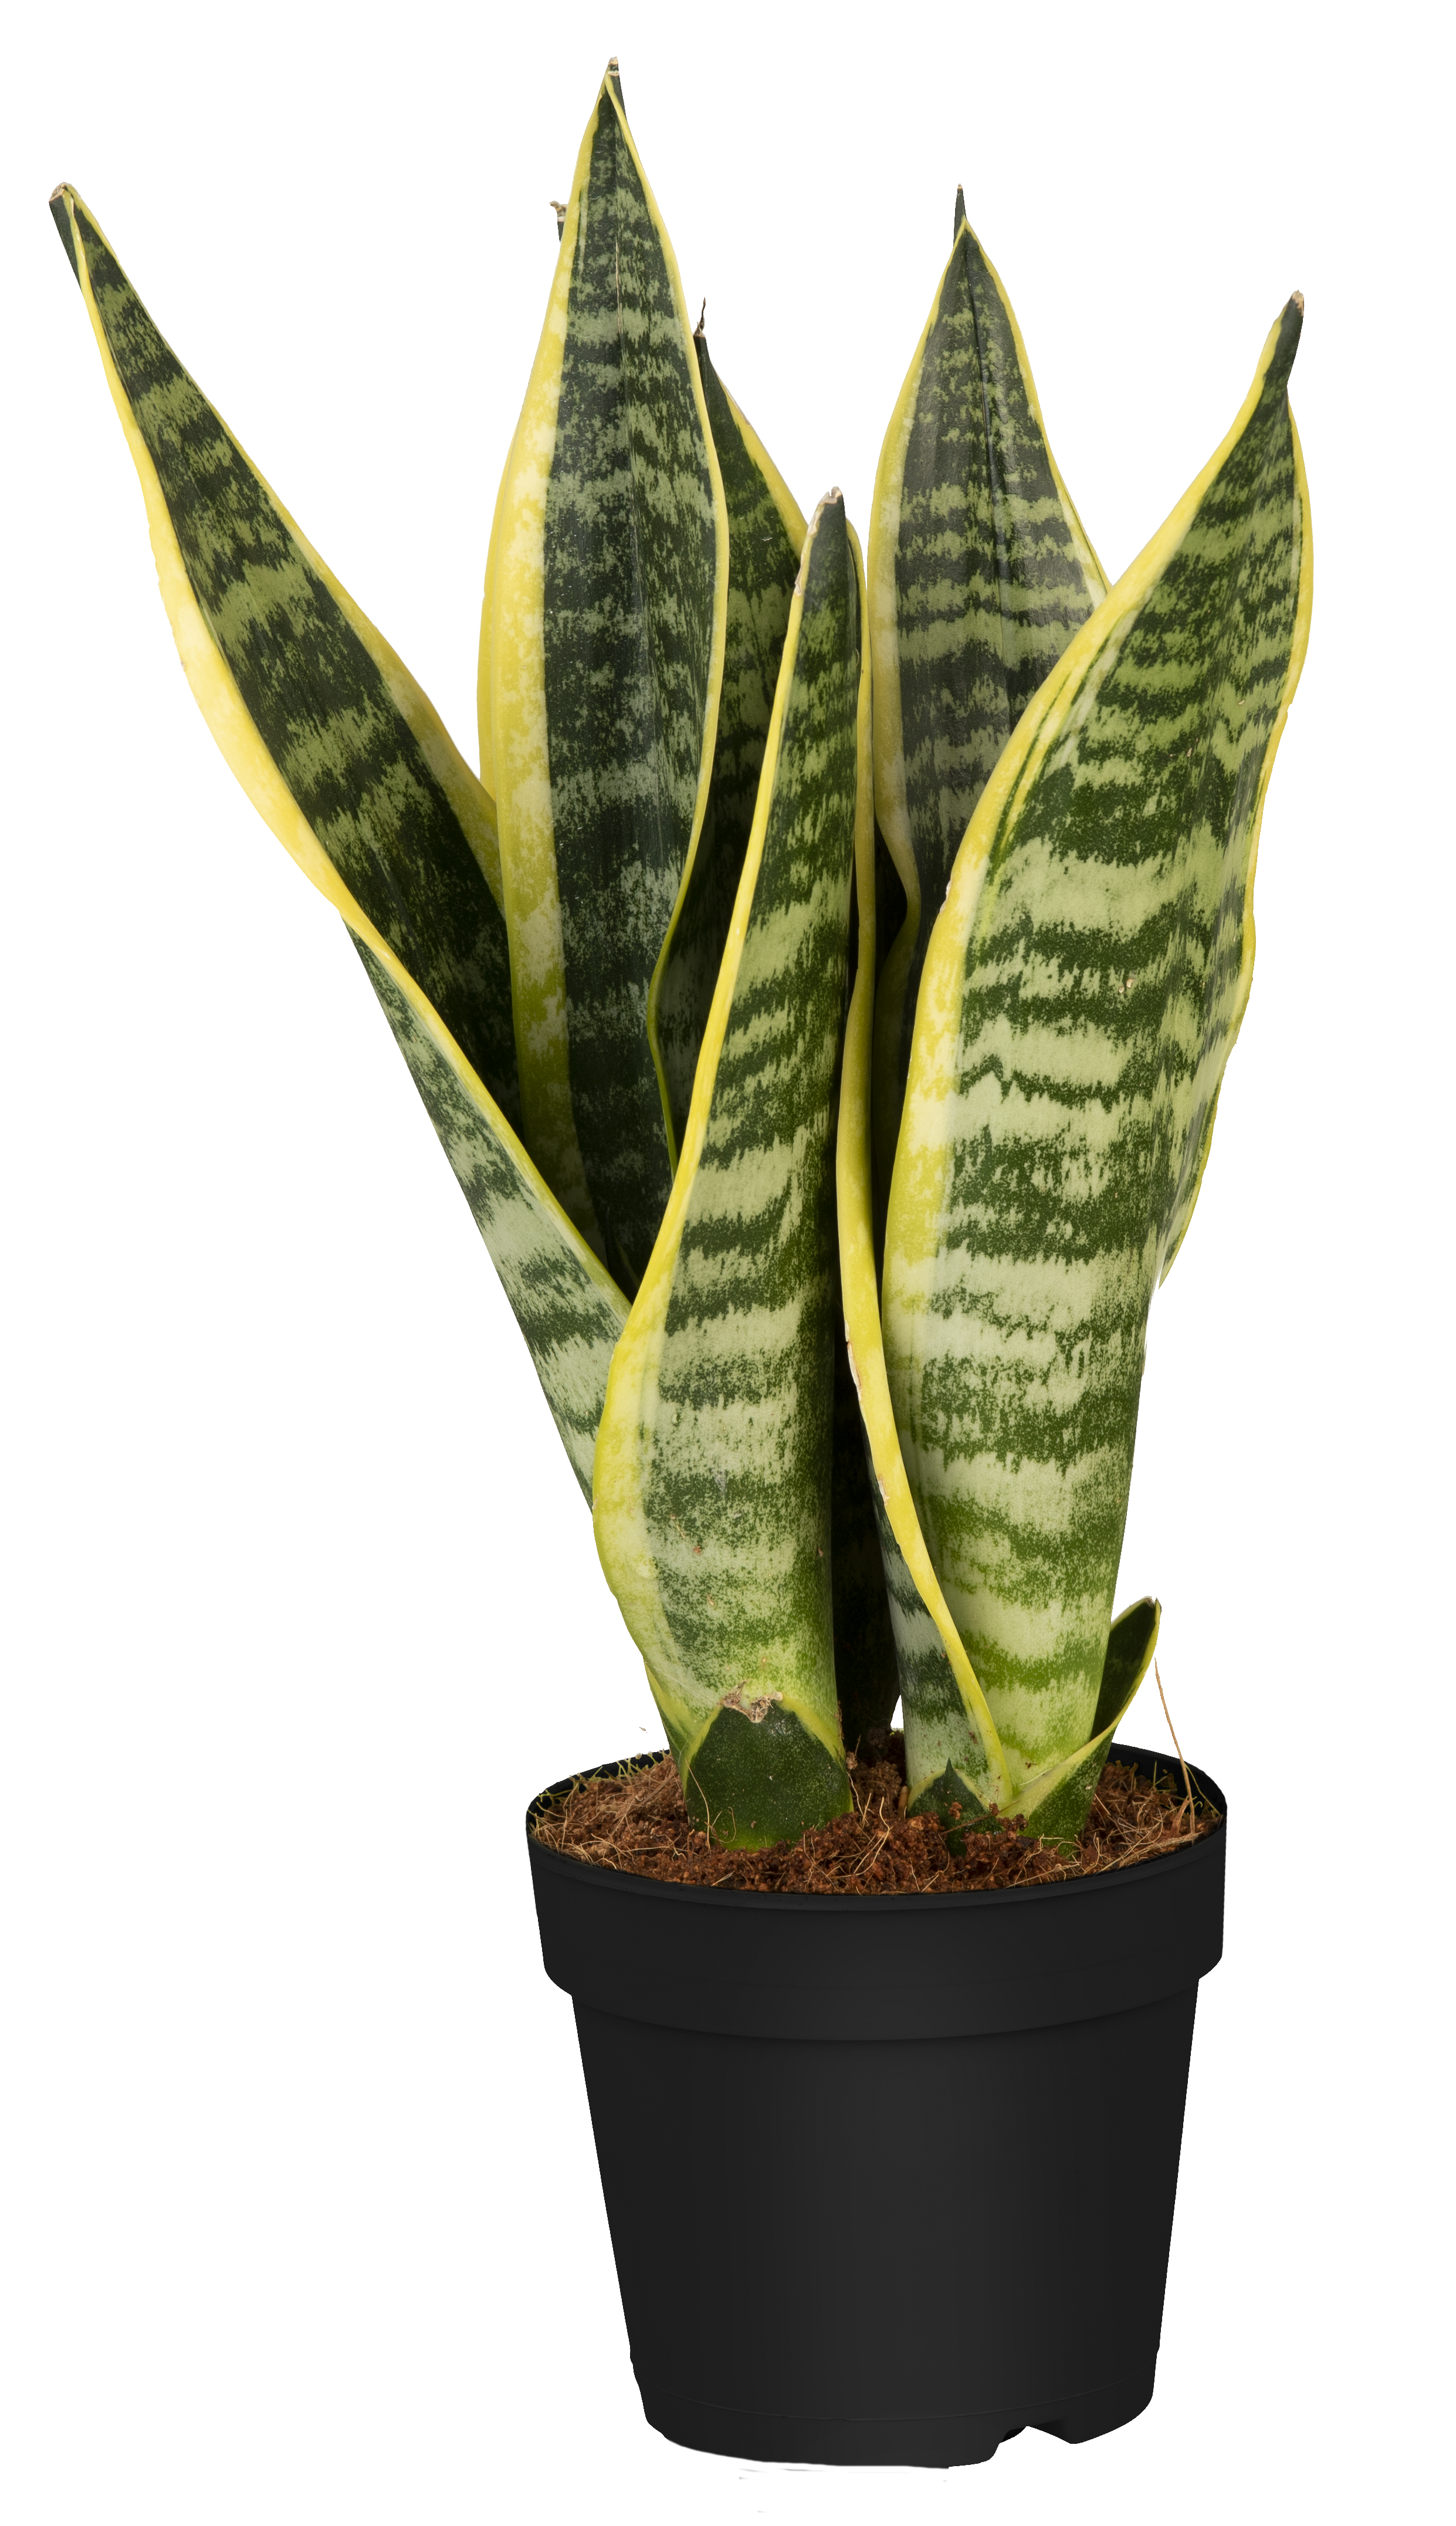 Sansevieria Trifasciata - Mother in Law Tonque, Snake Plant